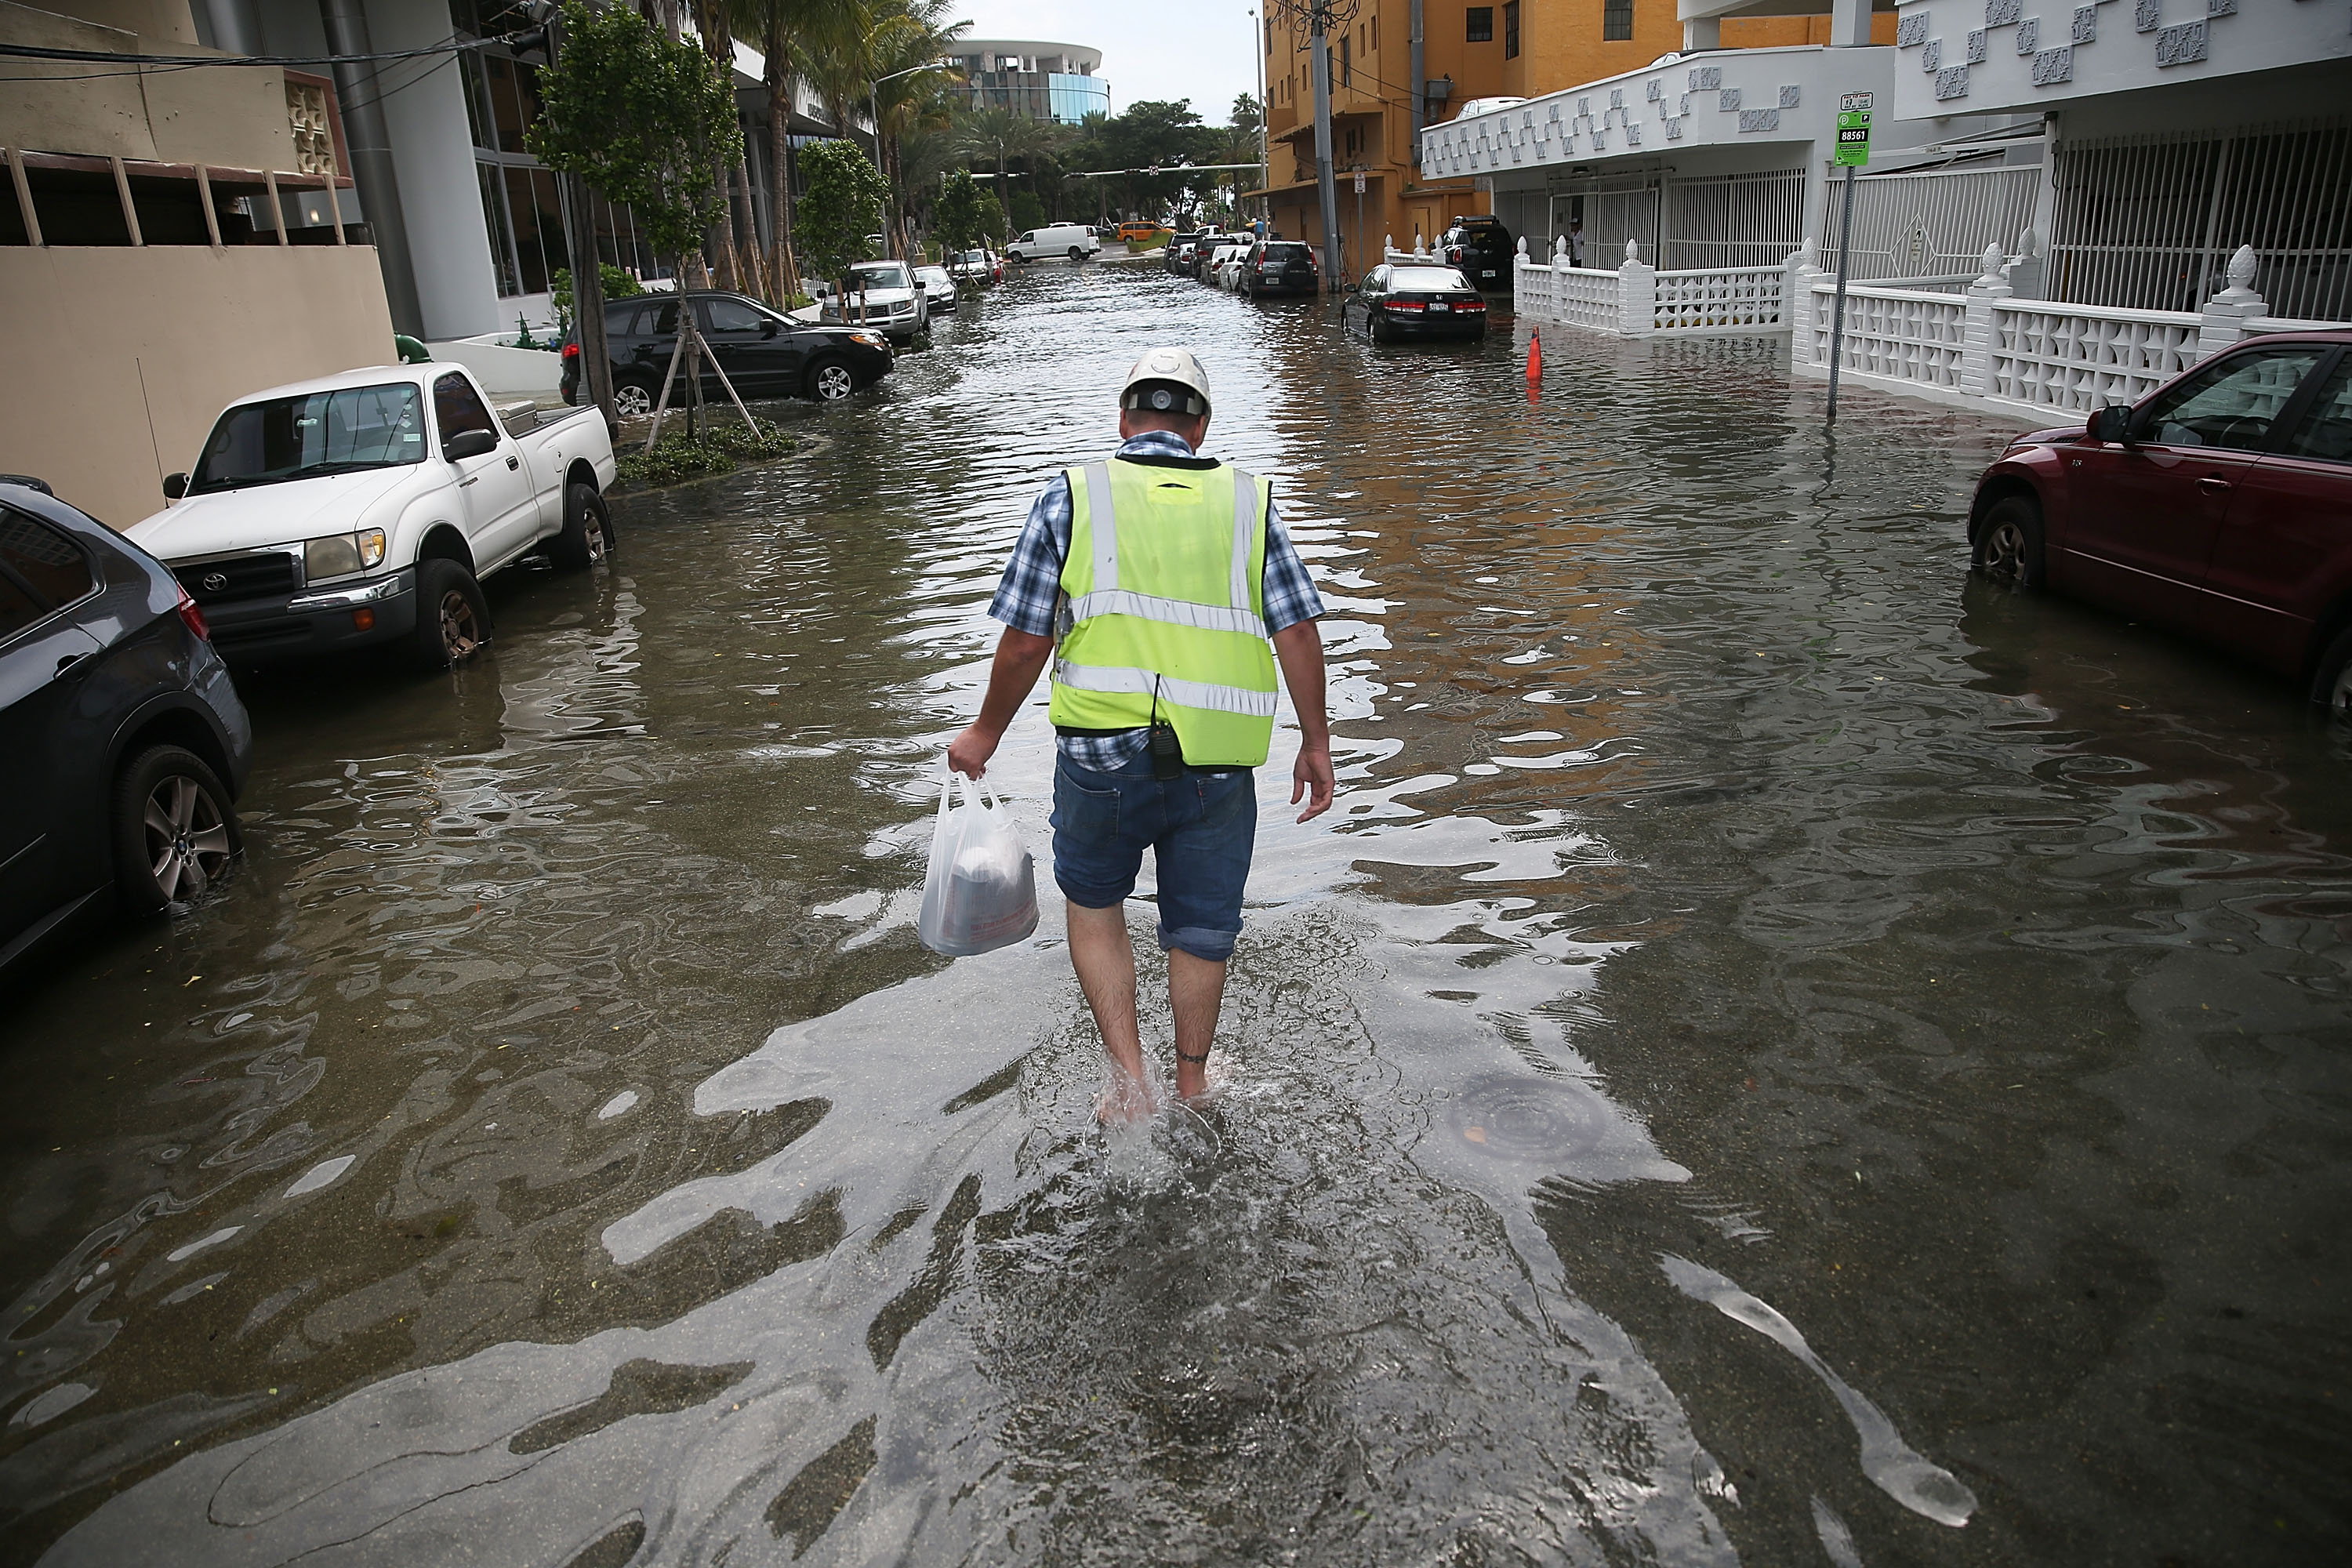 A man walks through a flooded street in Miami in Sept. 2015 (Joe Raedle—Getty Images)